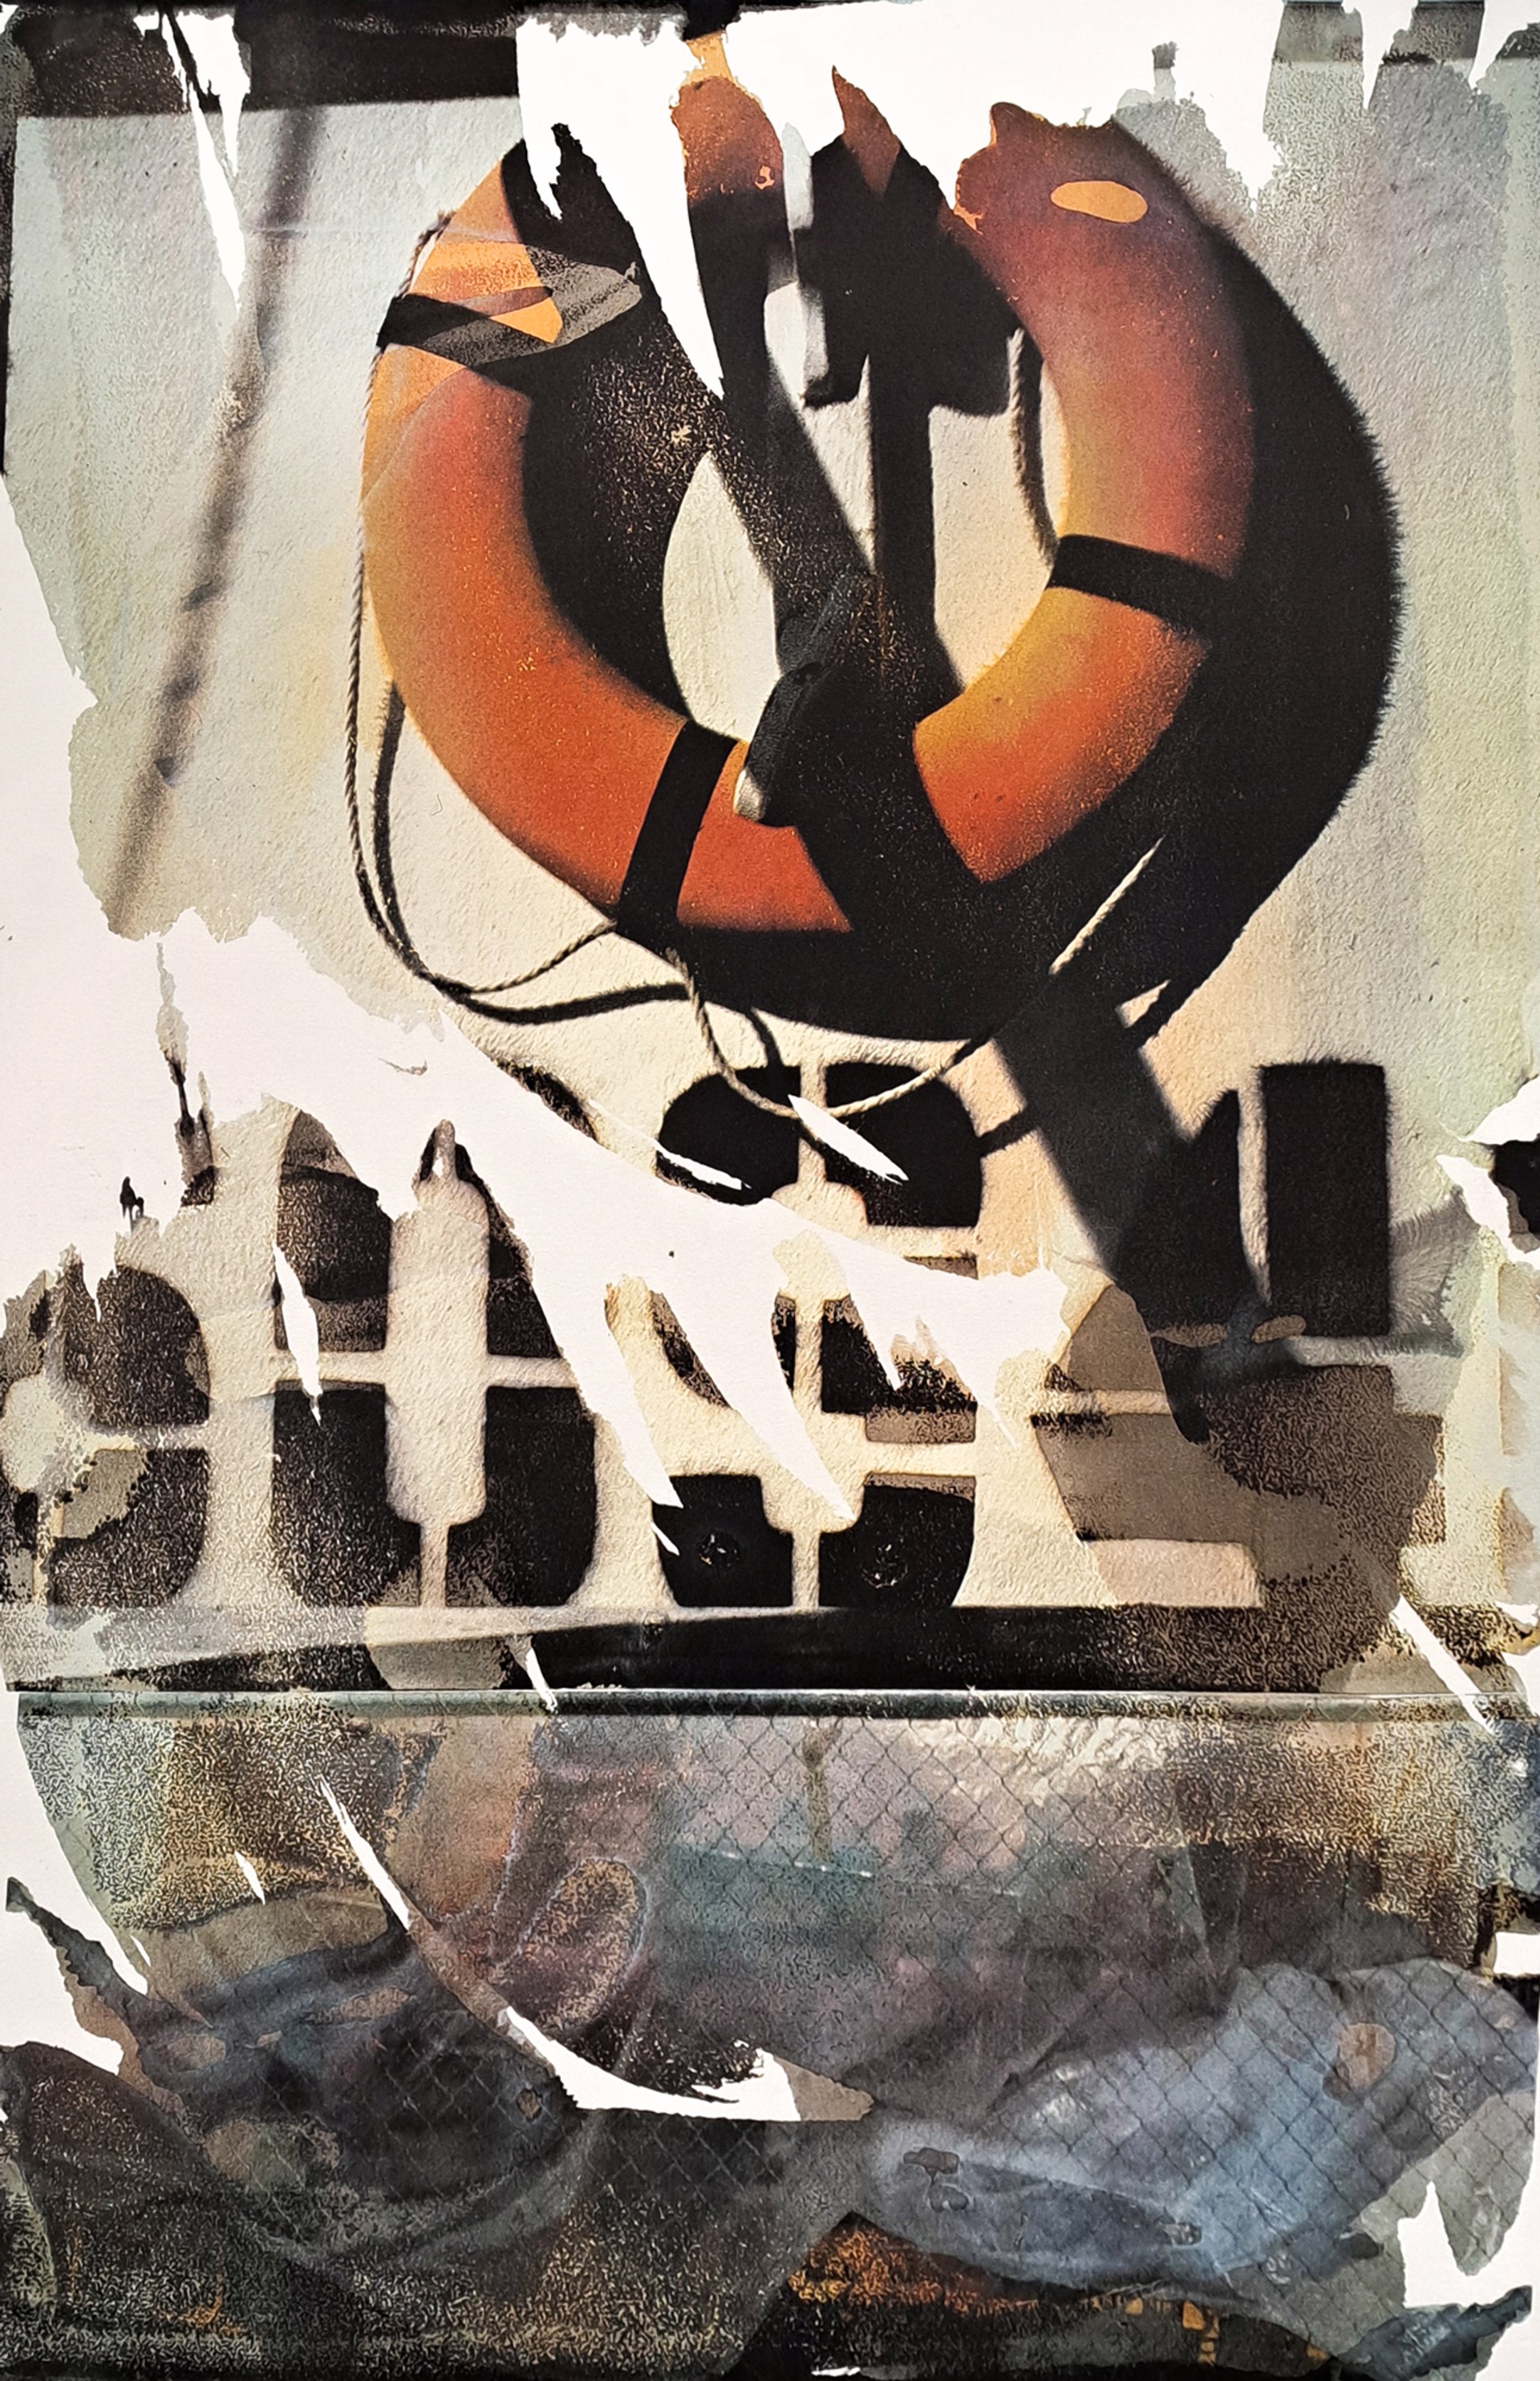 Health (from Tribute 21) by Robert Rauschenberg